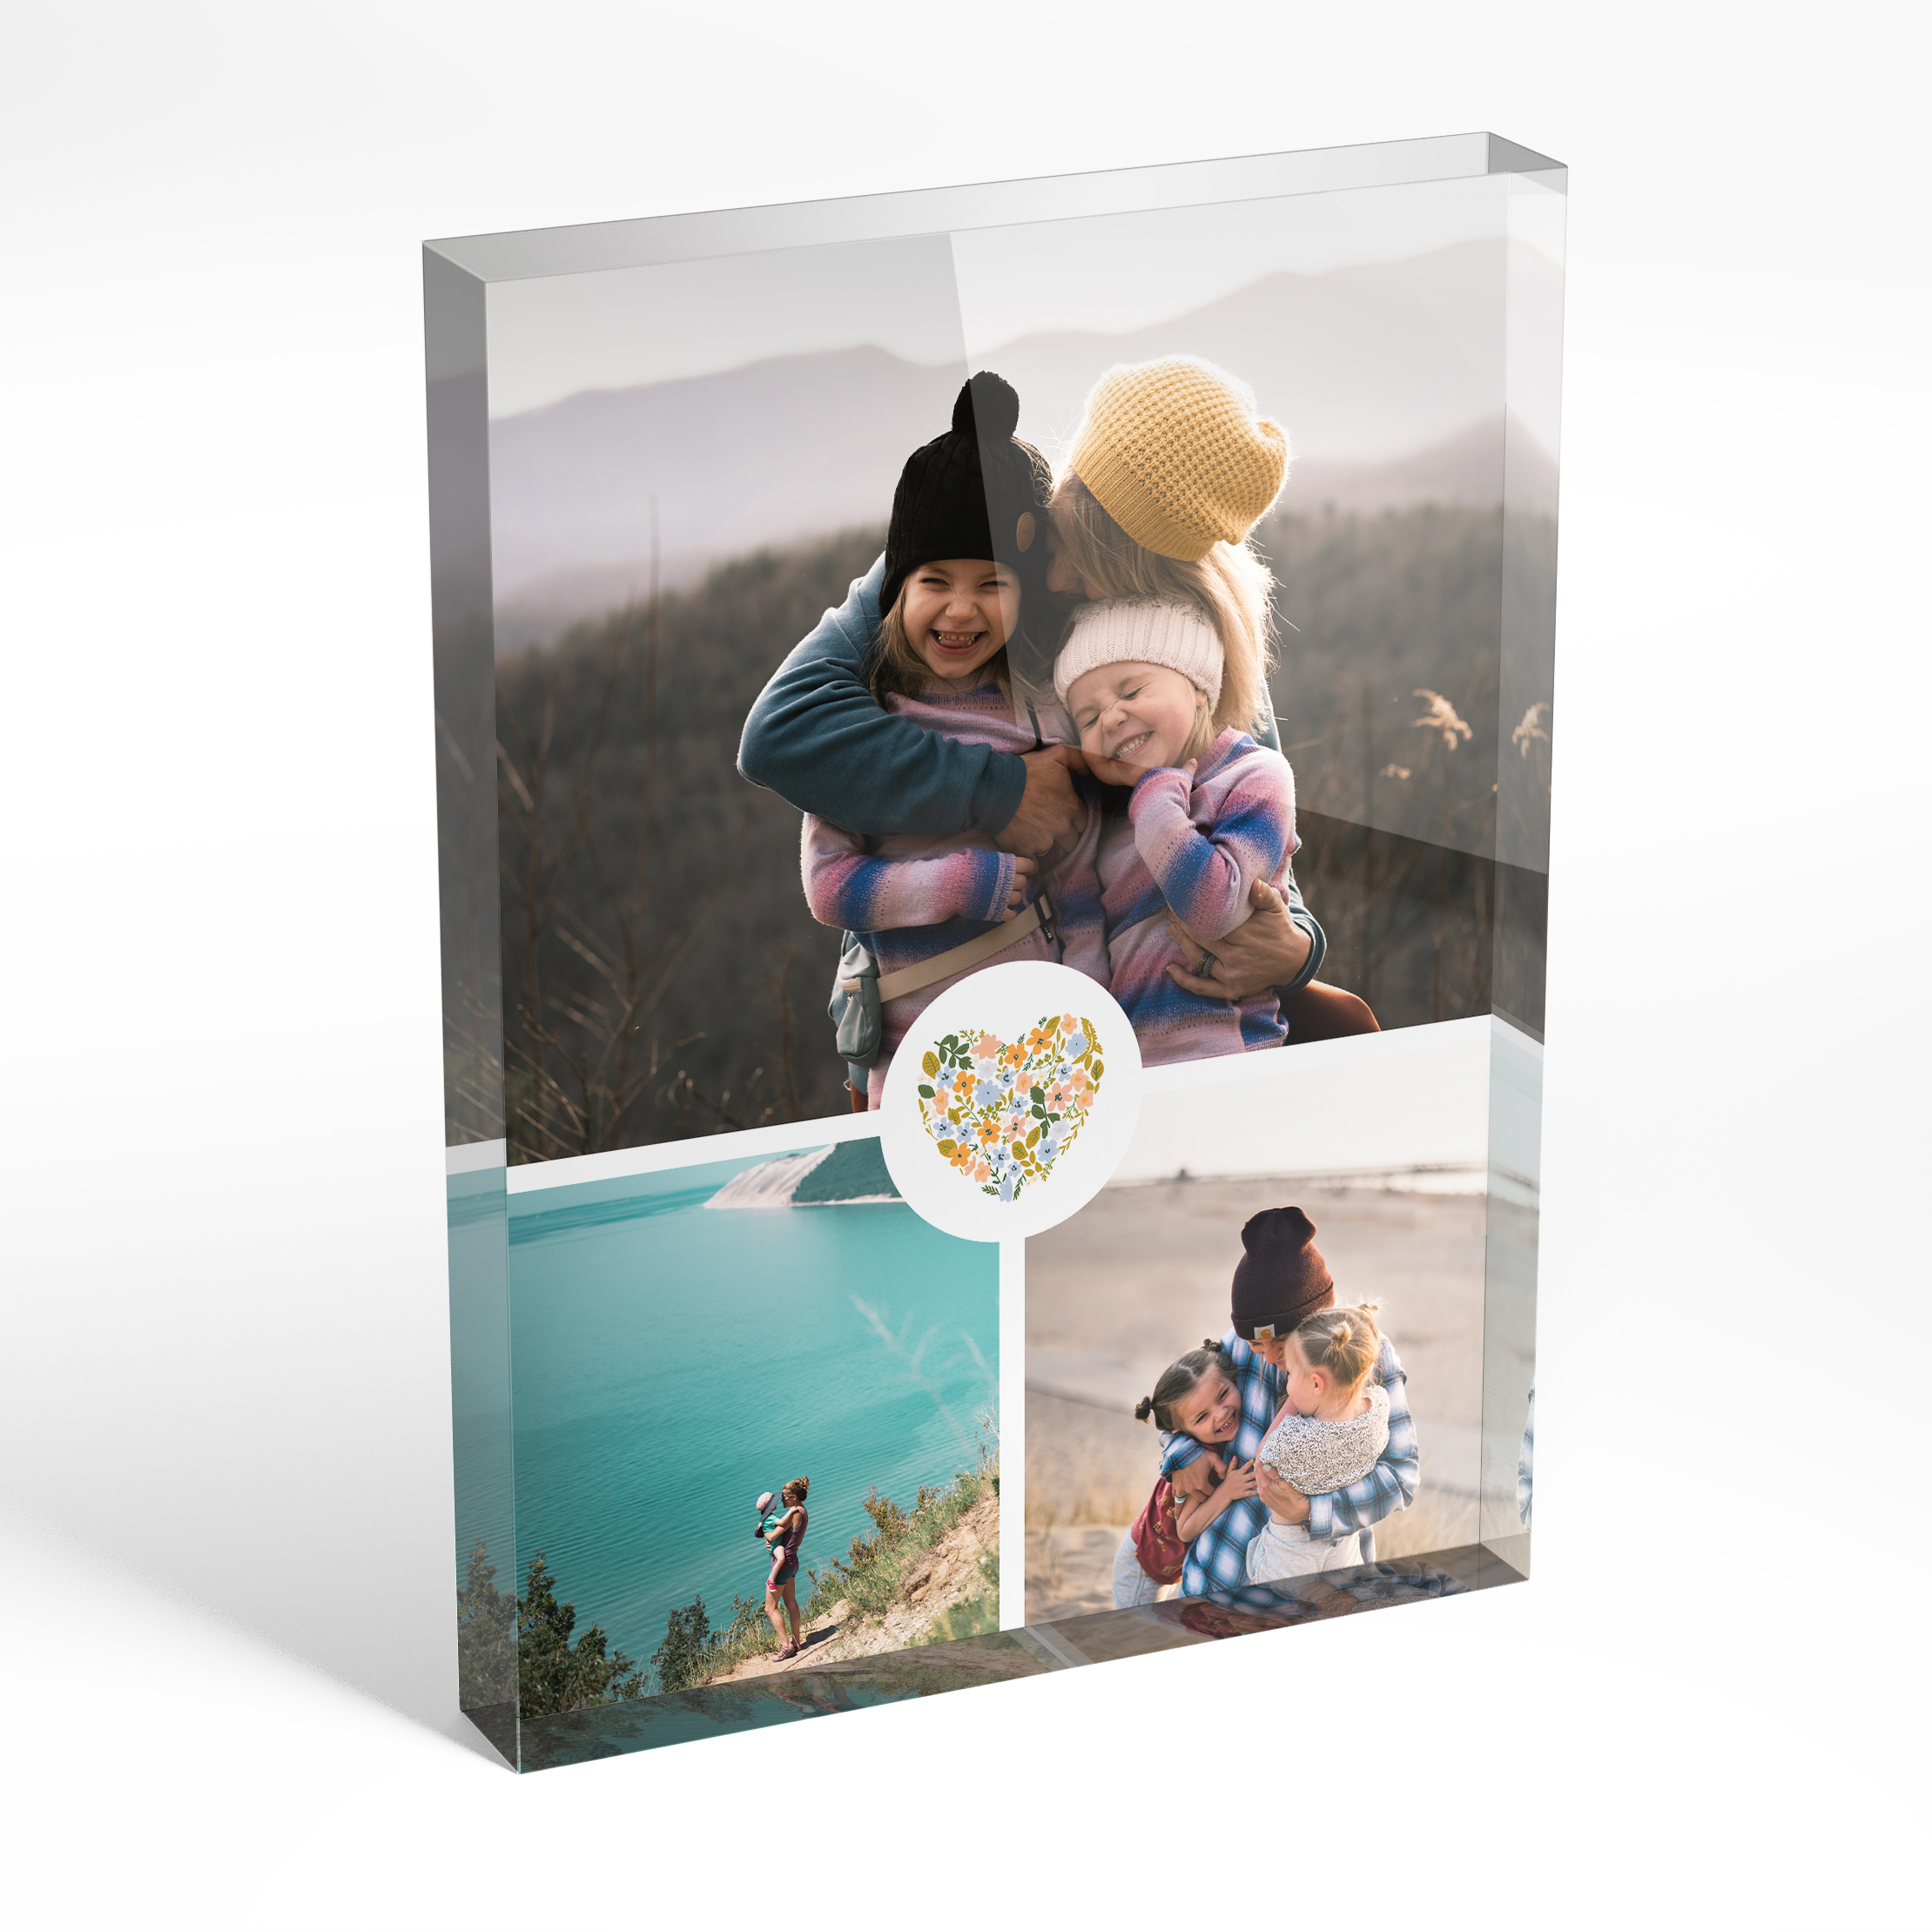 An angled side view of a portrait layout Online acrylic photo blocks with space for 3 photos. Thiis design is named "Floral Heart". 